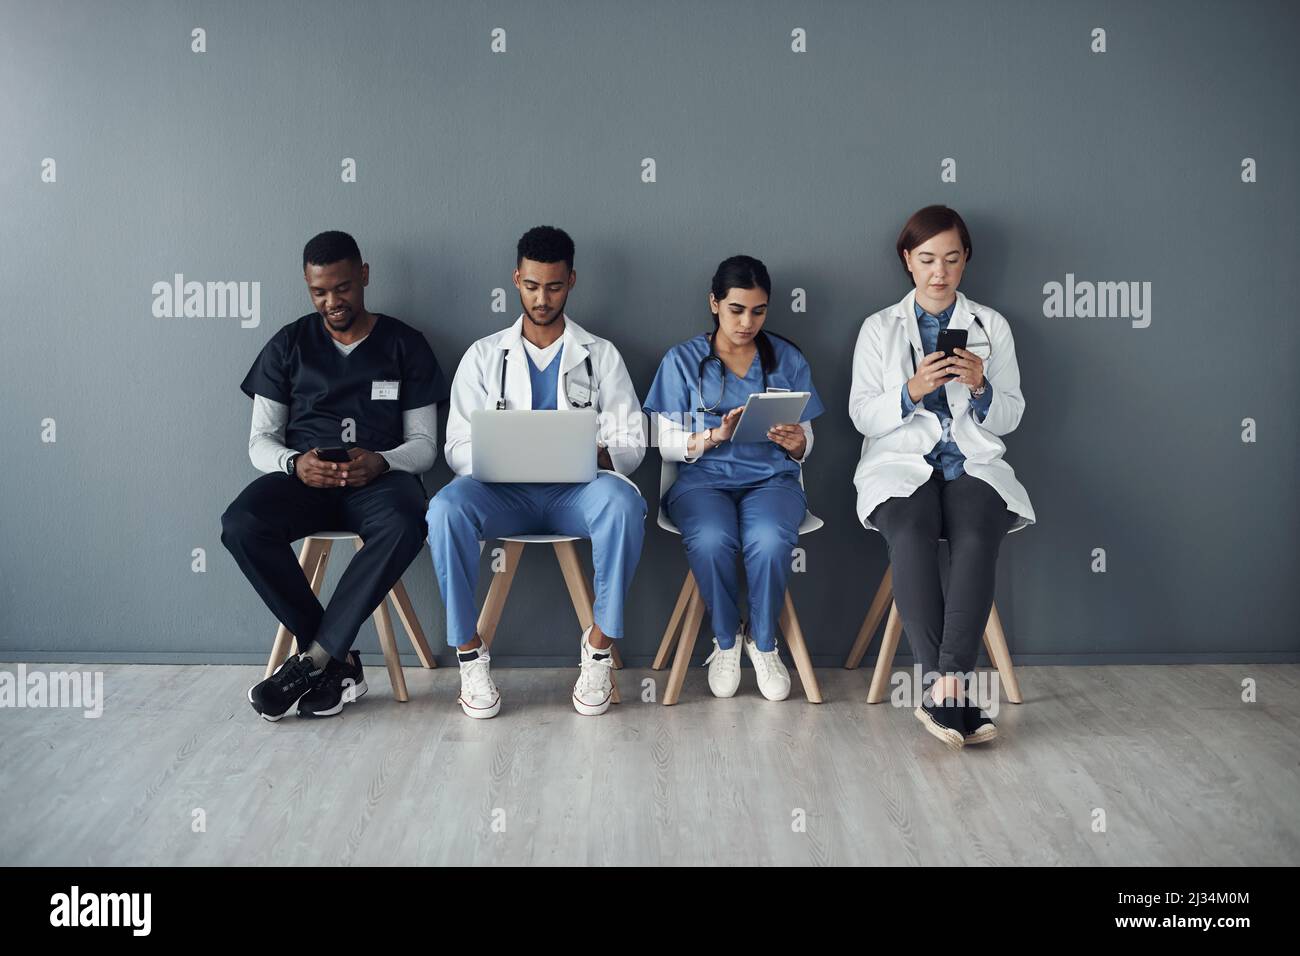 Sometimes, doctors risk their lives just save others. Shot of a group of doctors standing against a grey background at work. Stock Photo